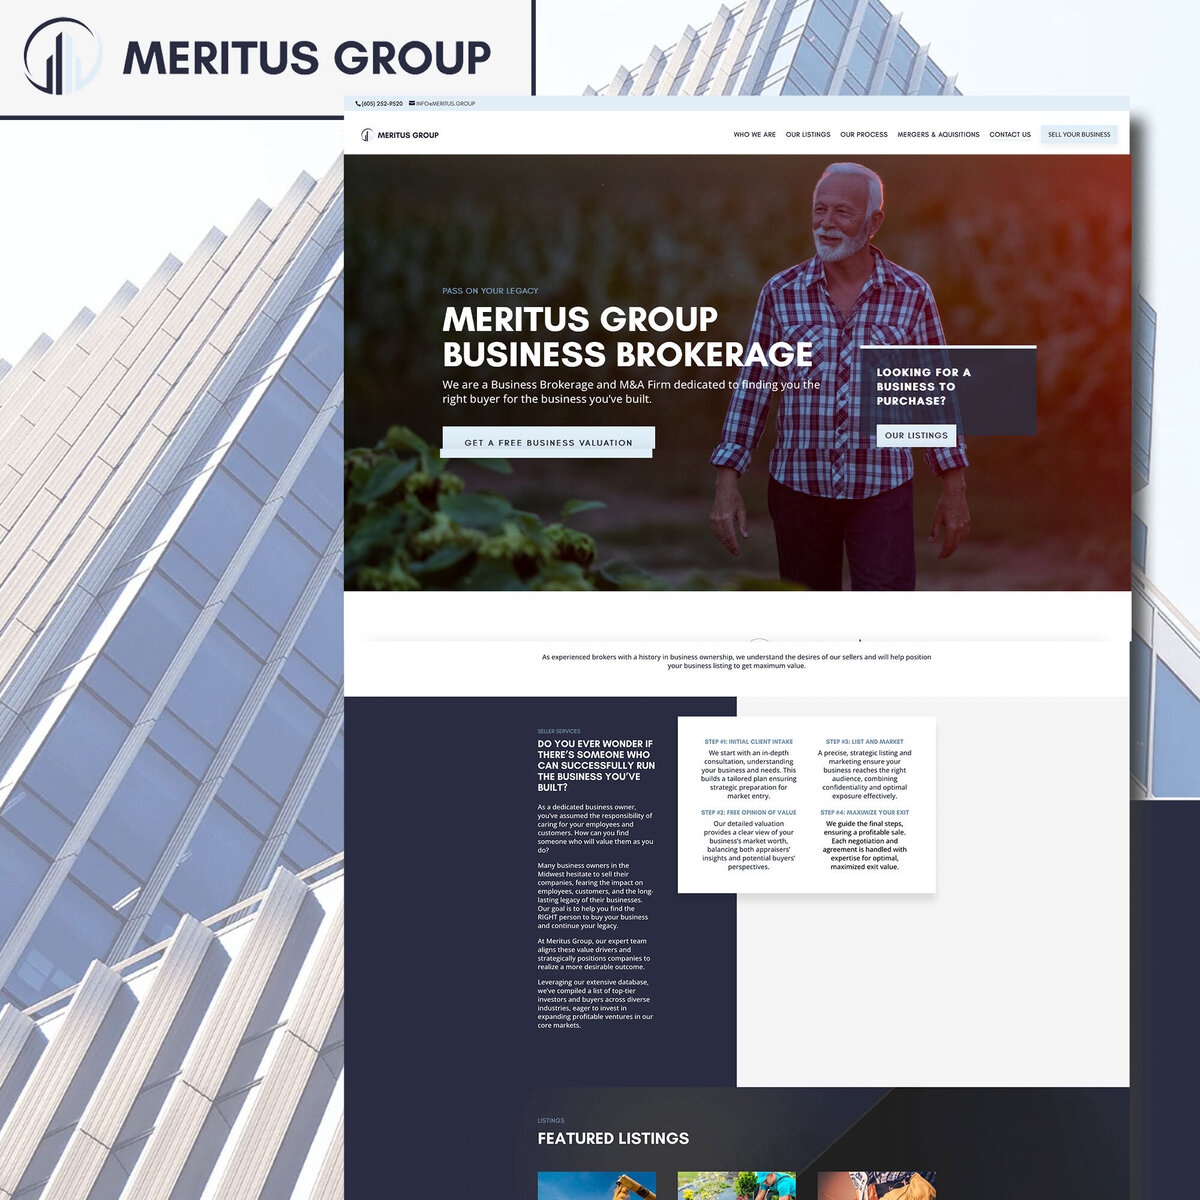 Elevate your brand's first impression with Meritus Group's bespoke logo and website designed by The Agency. Our creative excellence drives your brand identity and digital success.